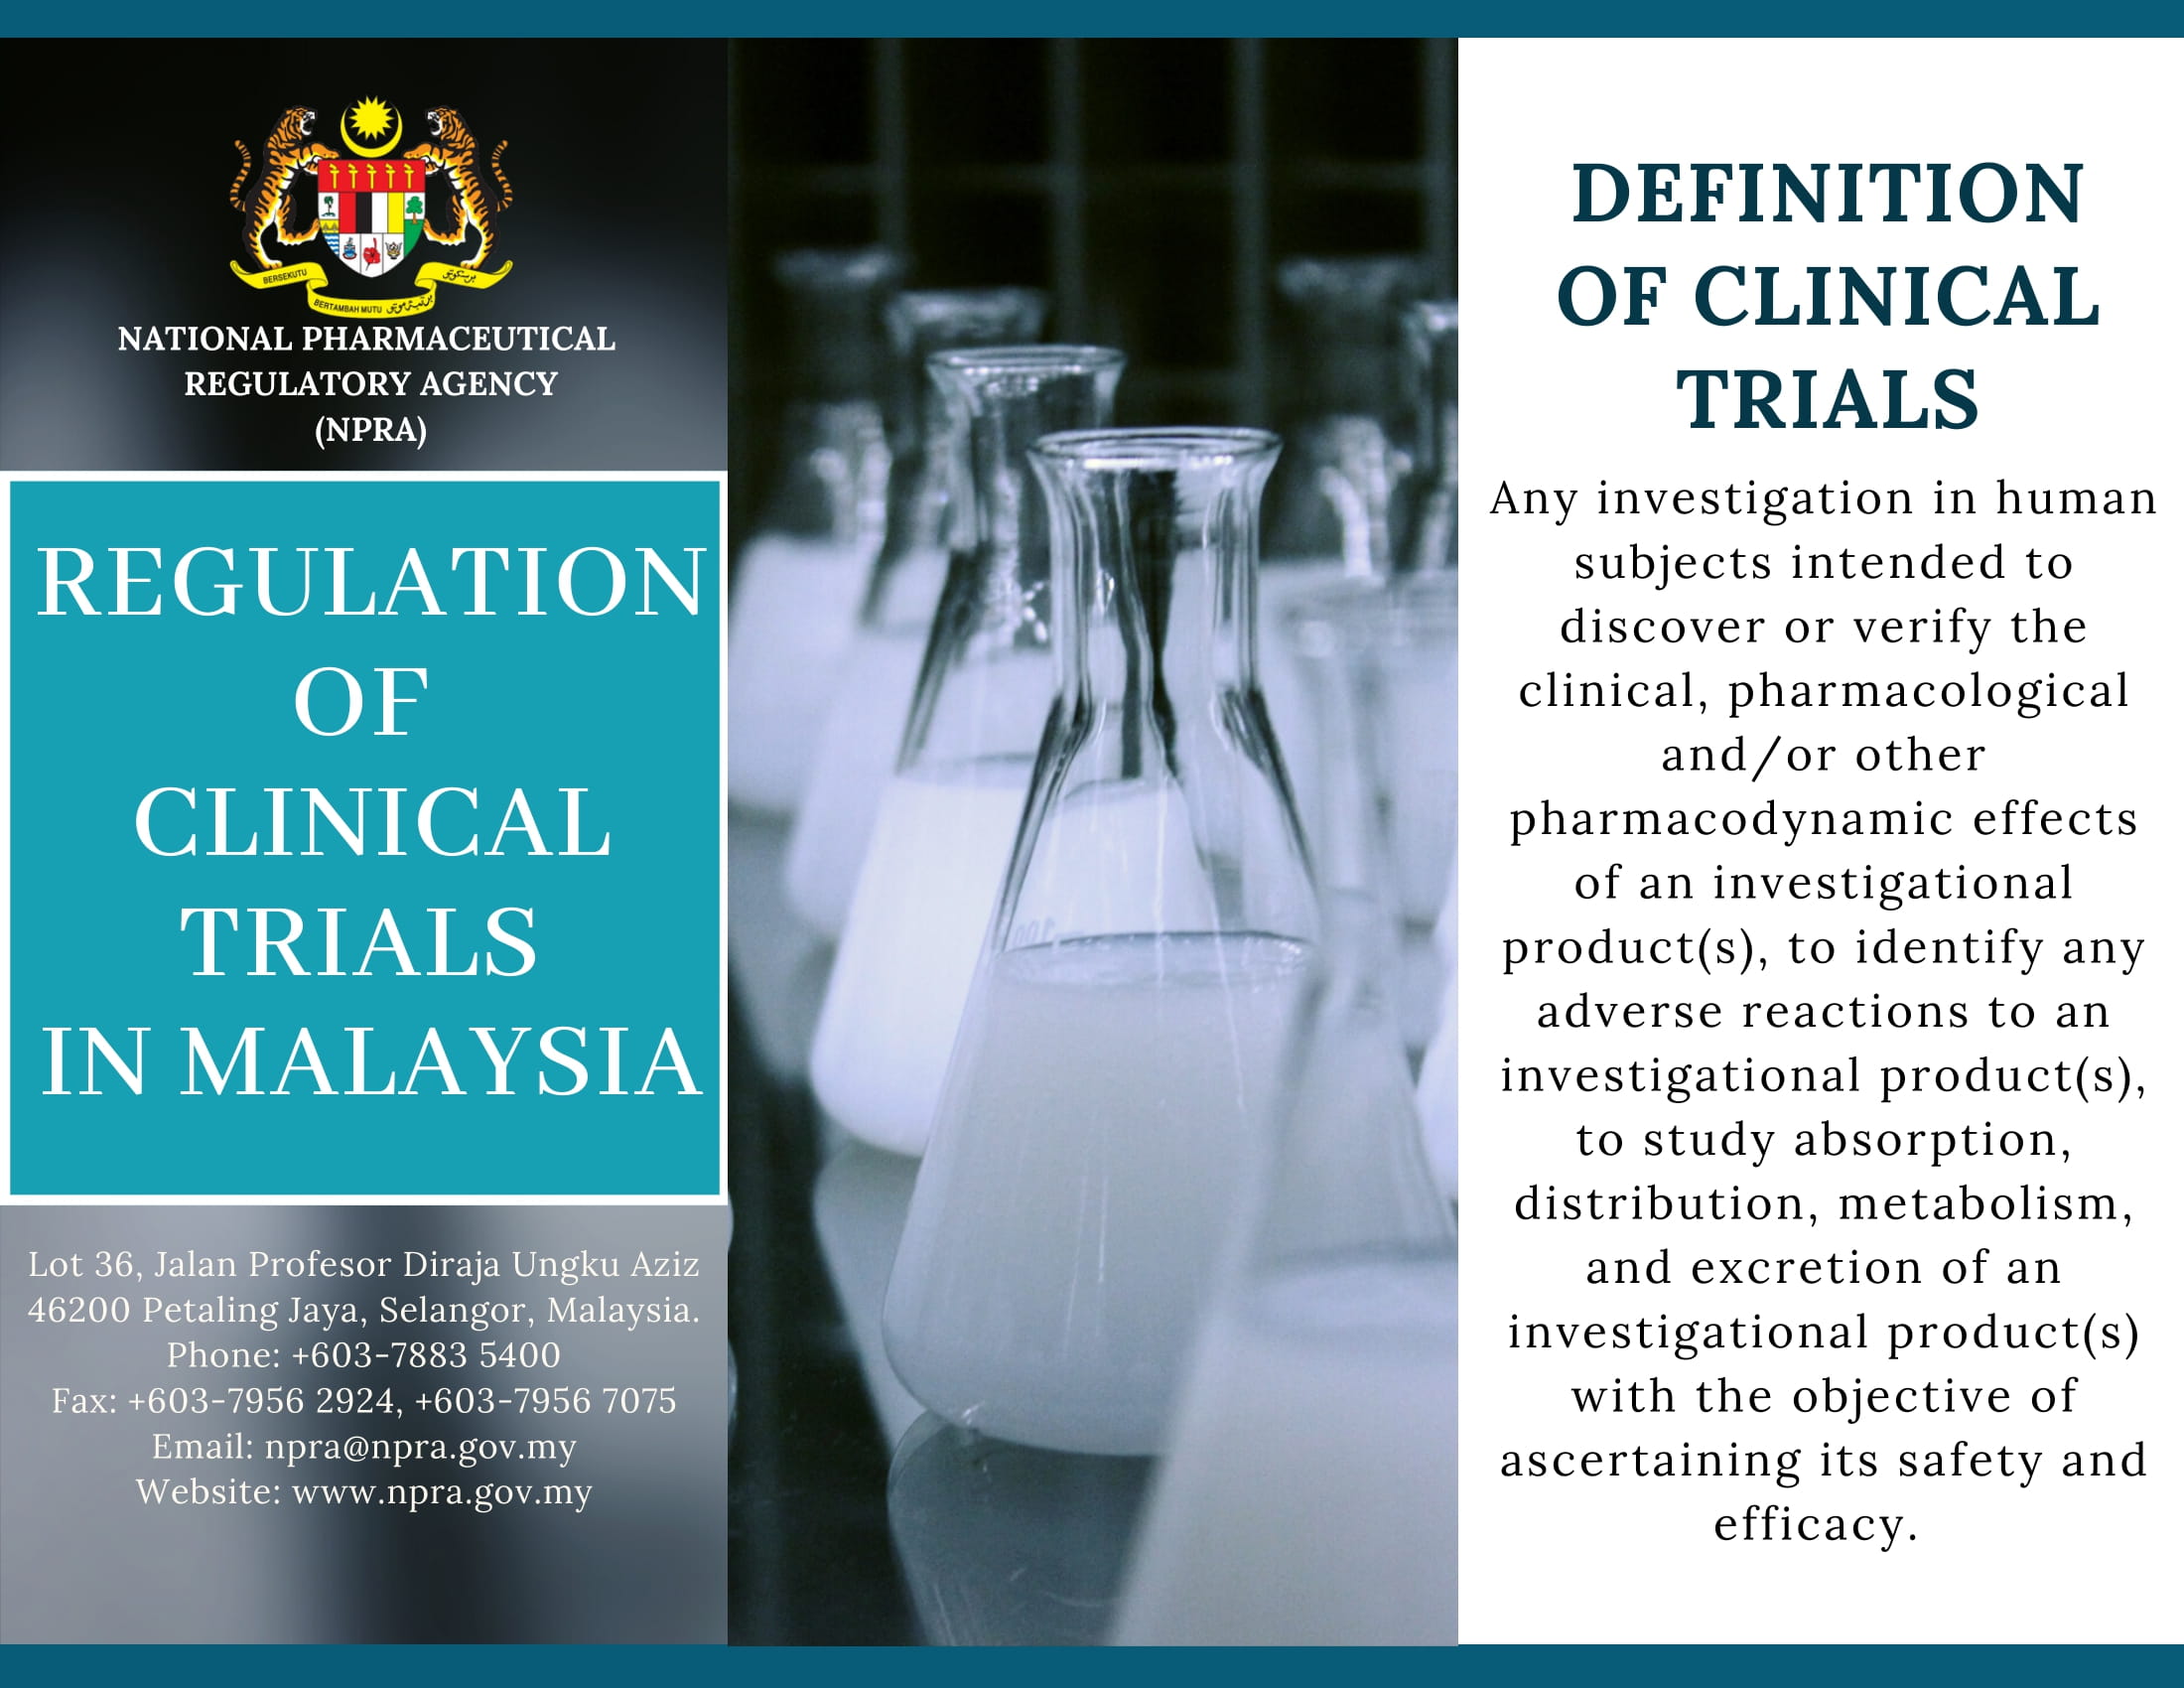 Regulation of Clinical Trials in Malaysia